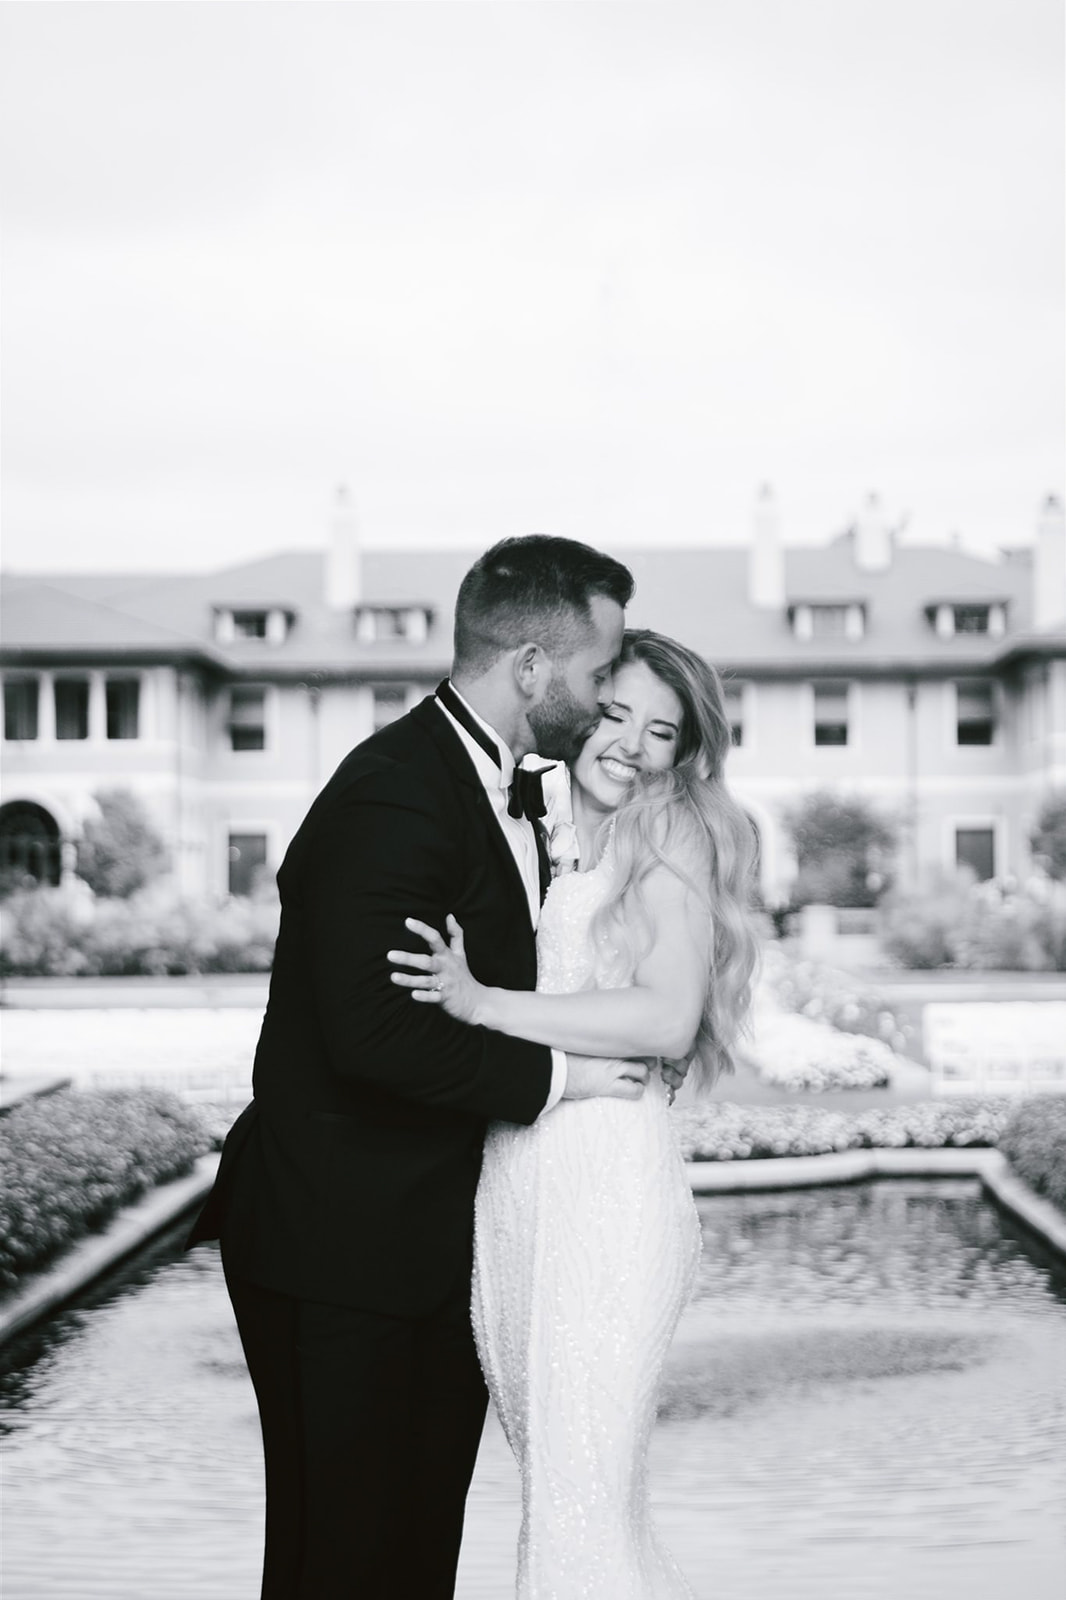 Bride and groom's heartfelt first look captured at Armour House, Lake Forest, sets the tone for a romantic wedding day.